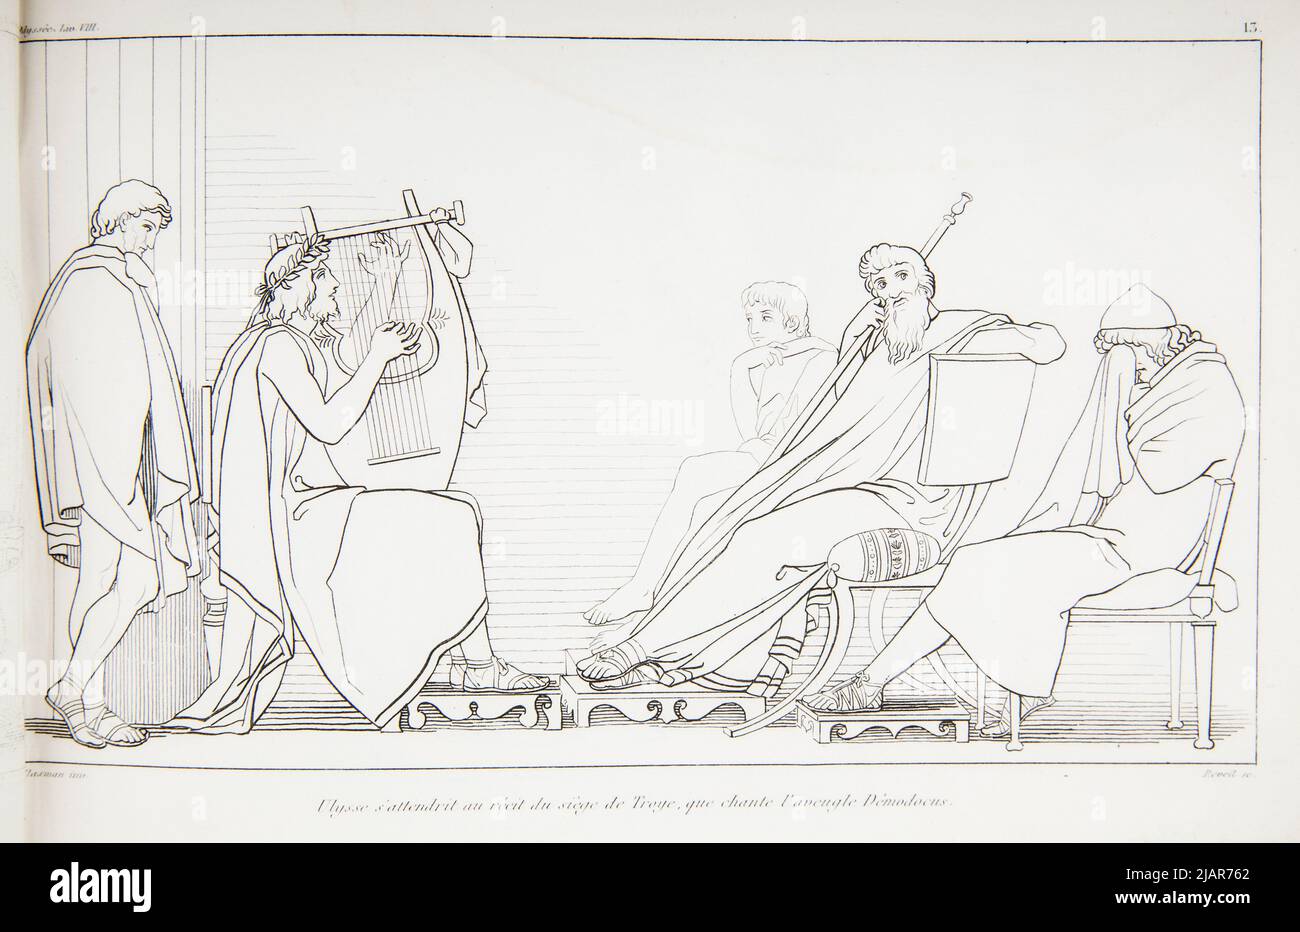 Ulysse tenderly at the story of Troye's seat, which the blind Demodocus sings. (Uiisses (Odysseus) Mourns (Despair Over) The History of the Siege of Troy, Sung by the Blind demodocus, from: The Odyssee d'Ar ), in: Oeurvre de Flaxmann  Collection of his Composions serious by back, with analysis of the divine comedy of the Dante and notice on Flaxman. Various subjects. Paris 1847 . FERRERI, Vincenzo (Fl. 1845), Flaxman, John (1755 1826), Audot, bookseller editor, Paris rue du Paon 8, school of medicine Stock Photo